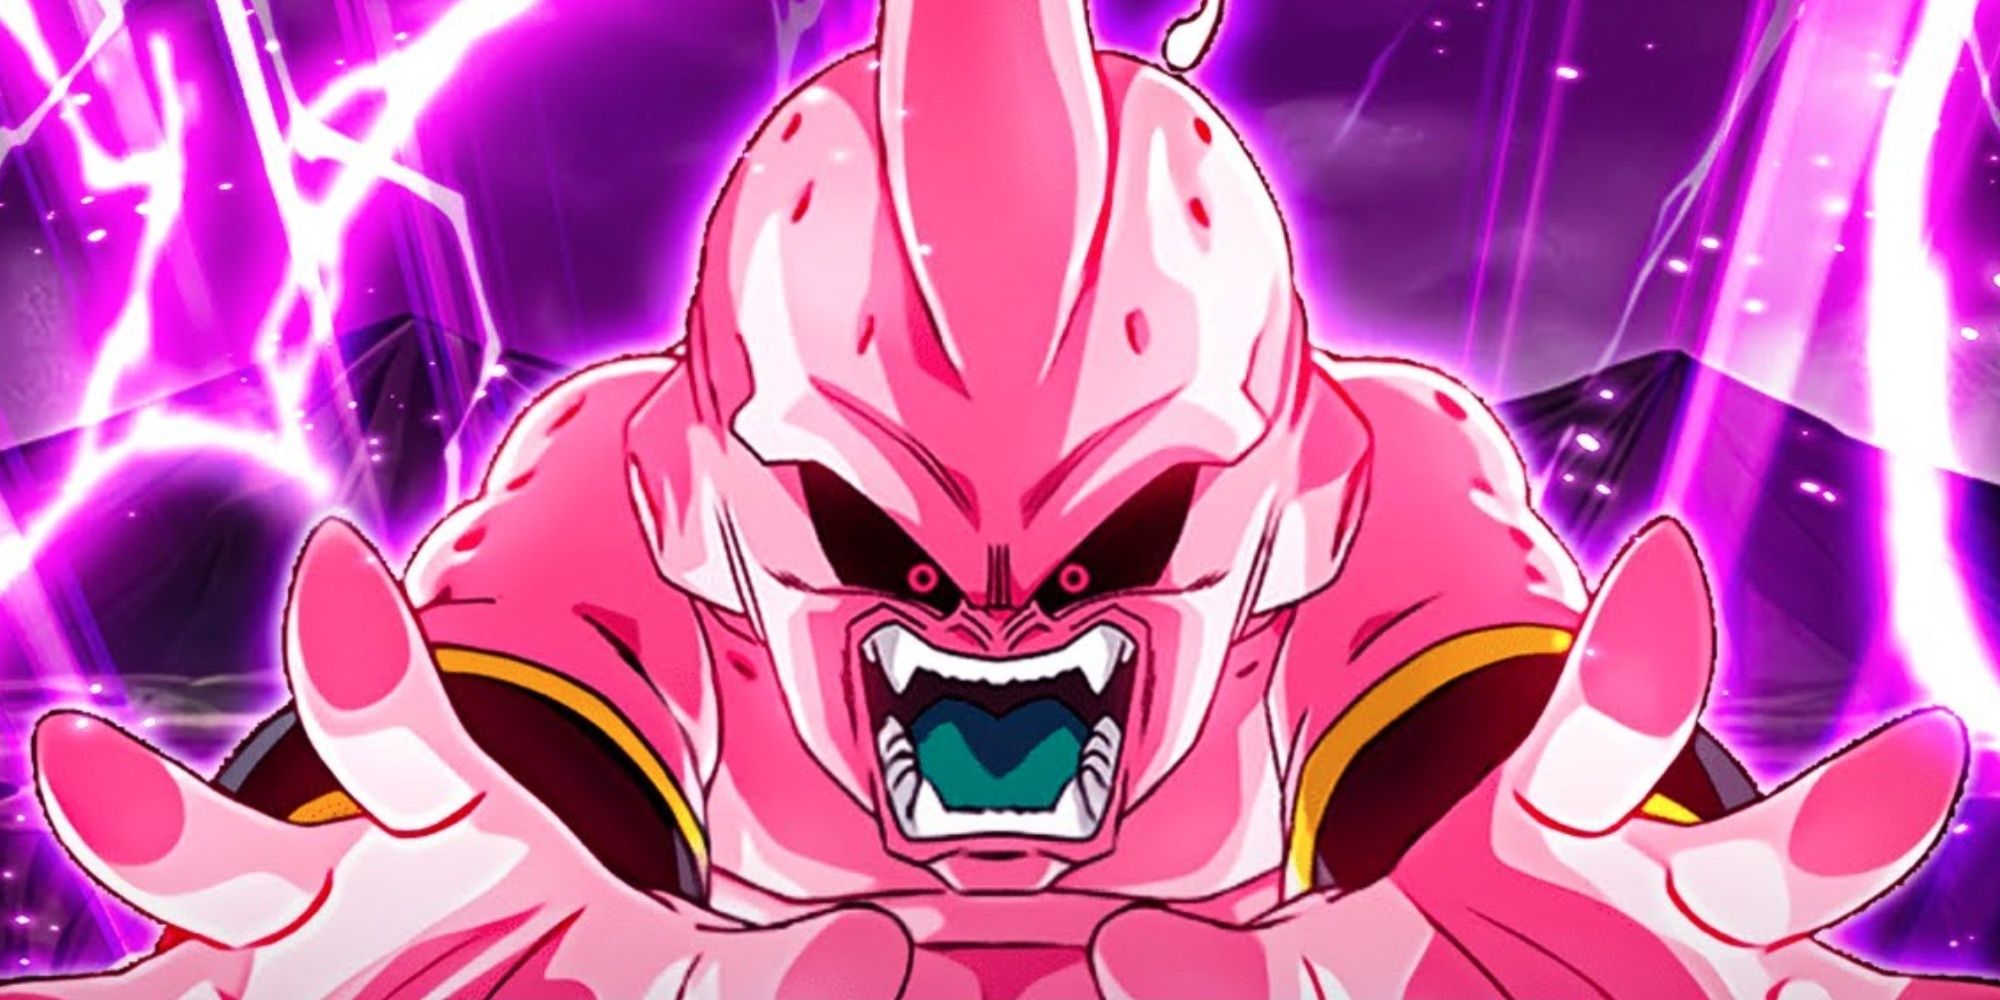 SUPER ATTACK EFFECTS: WHAT DO THEY DO AND WHERE ARE THEY BEST USED: DBZ  DOKKAN BATTLE 